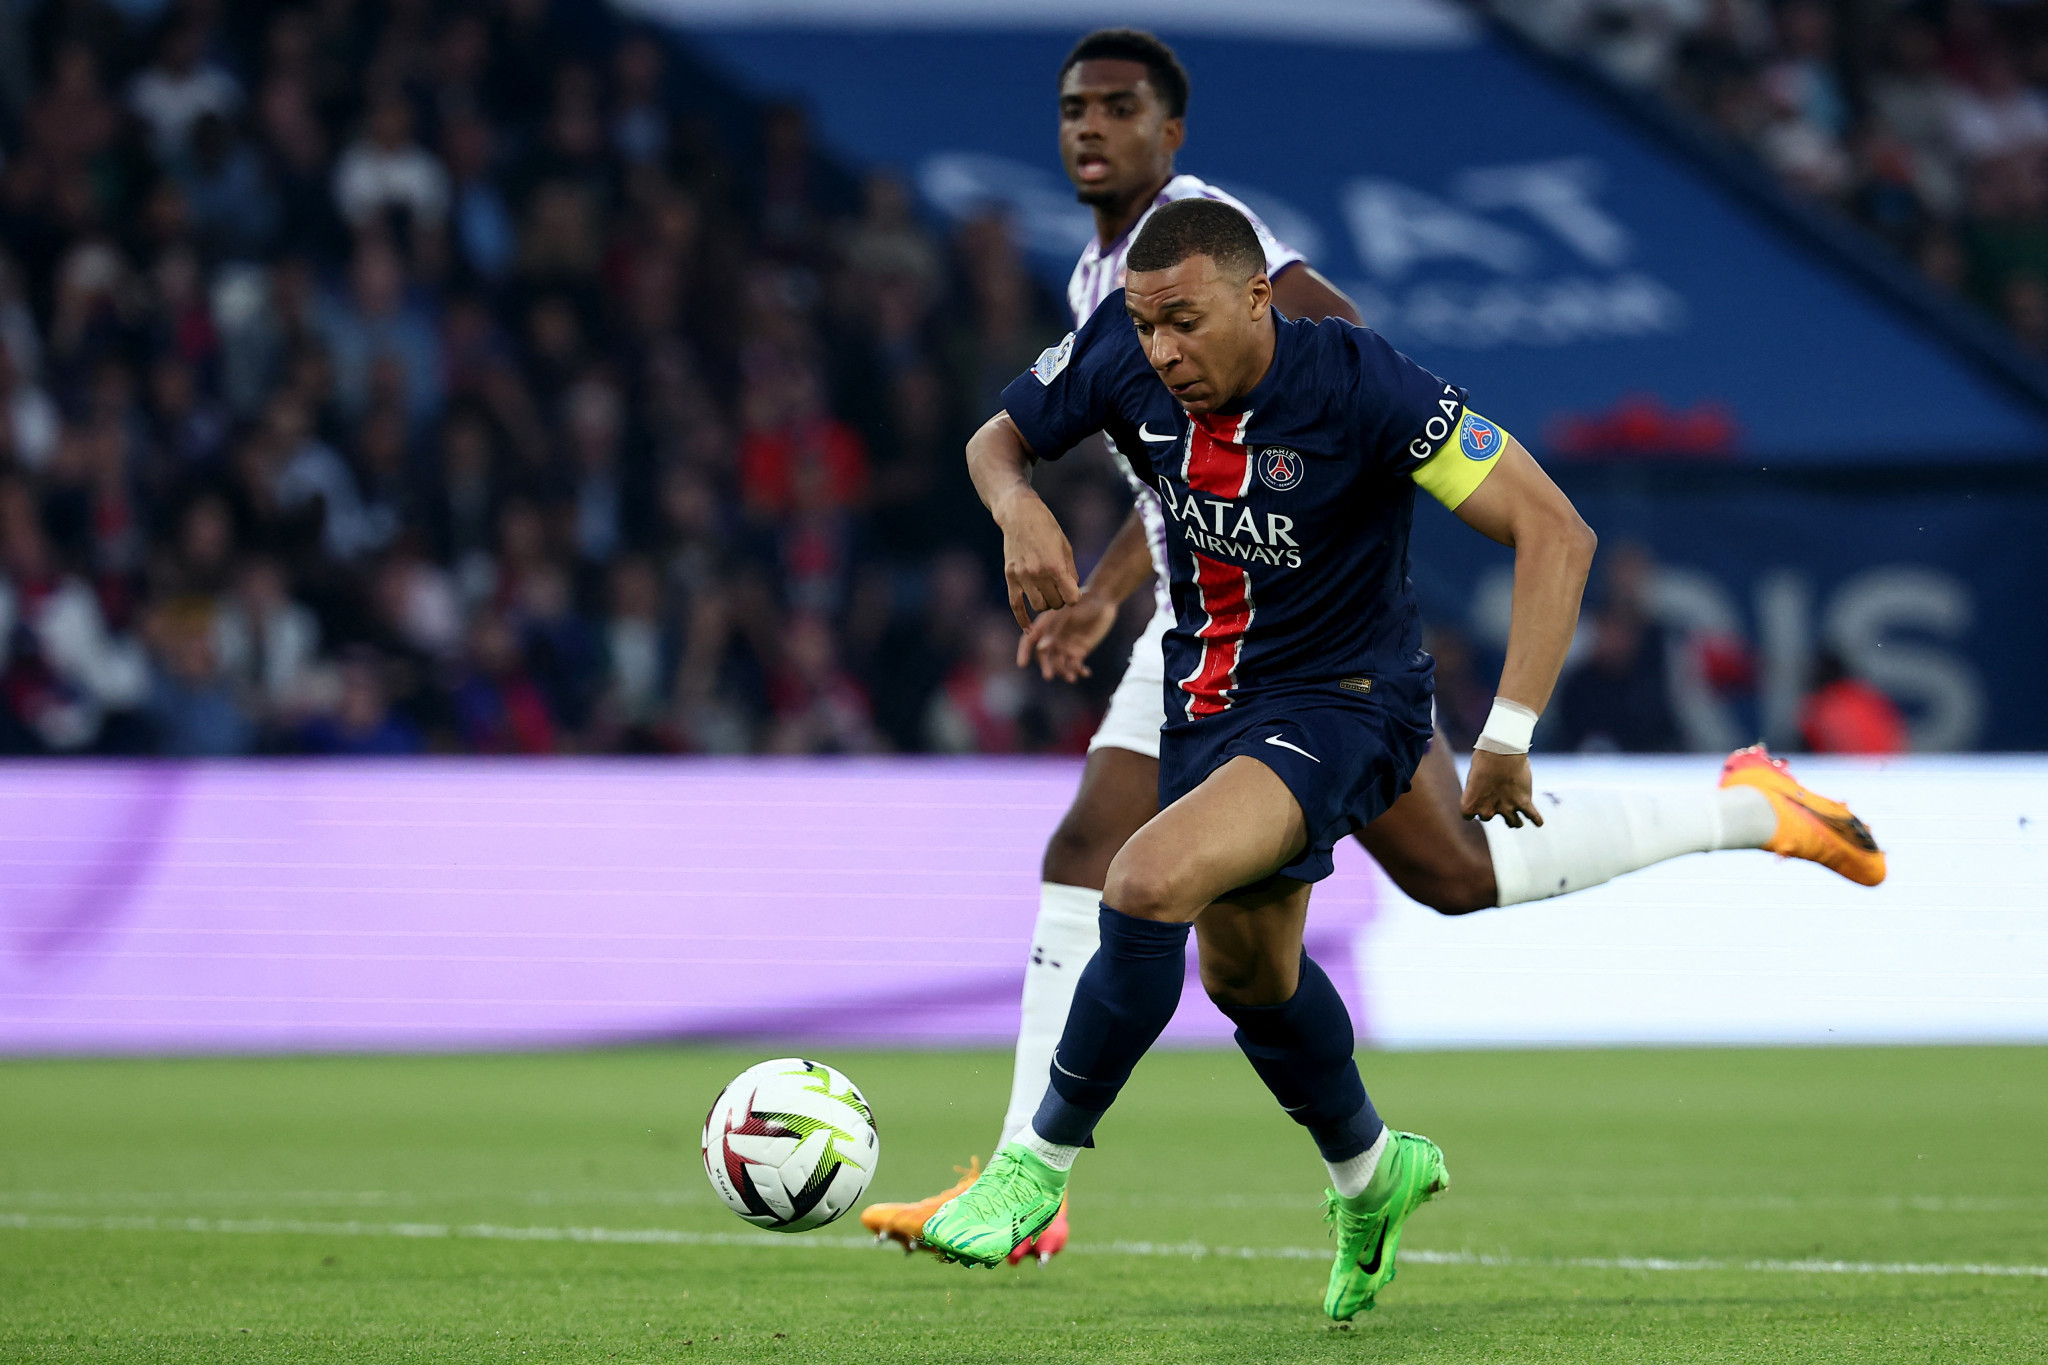 Kylian Mbappe has not received his payment and bonus for April due to a financial dispute, according to reports. GETTY IMAGES